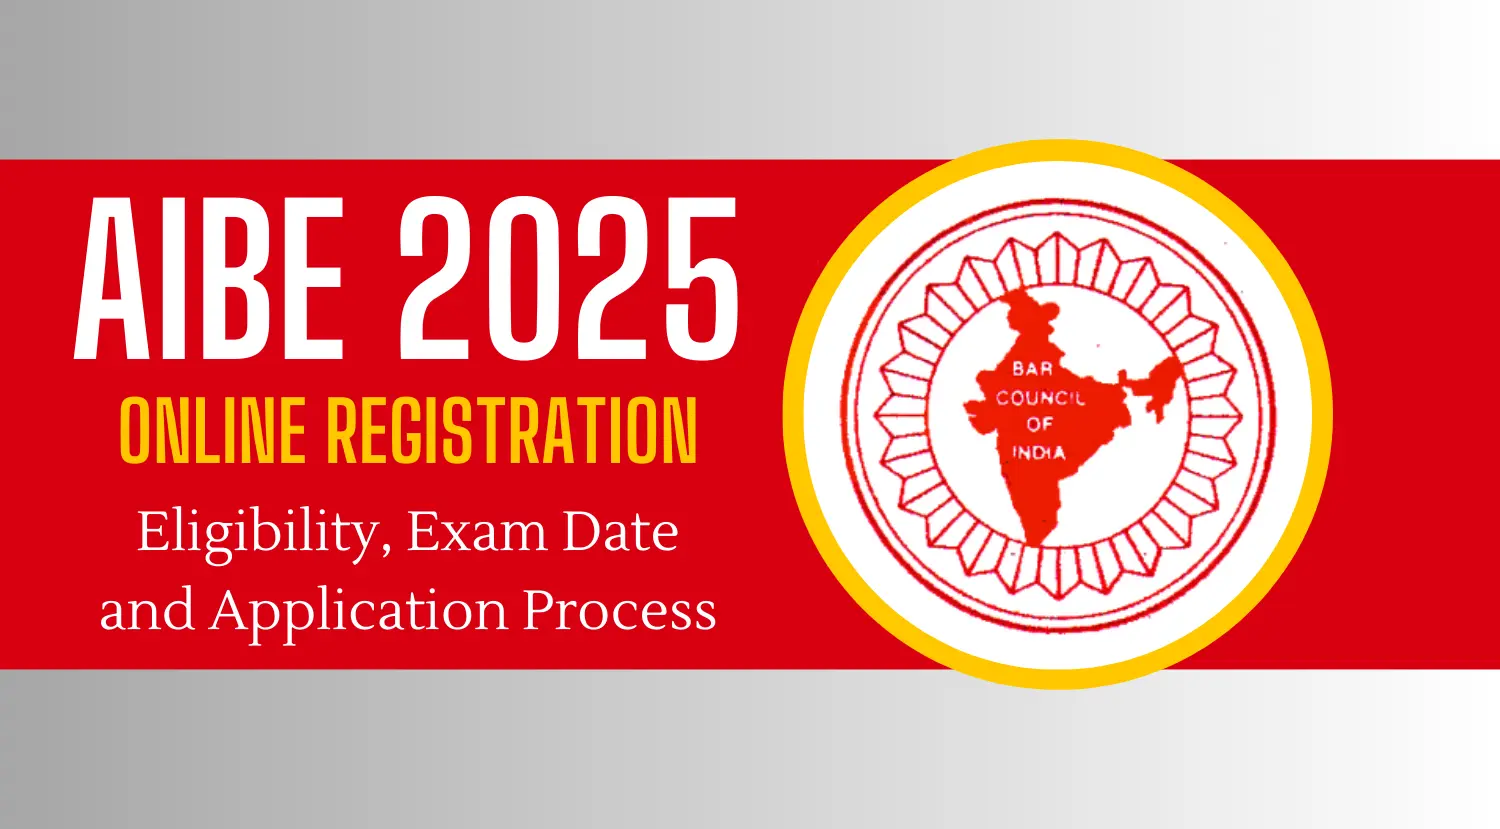 AIBE 2025 Online Registration Eligibility Exam Date and Application Process